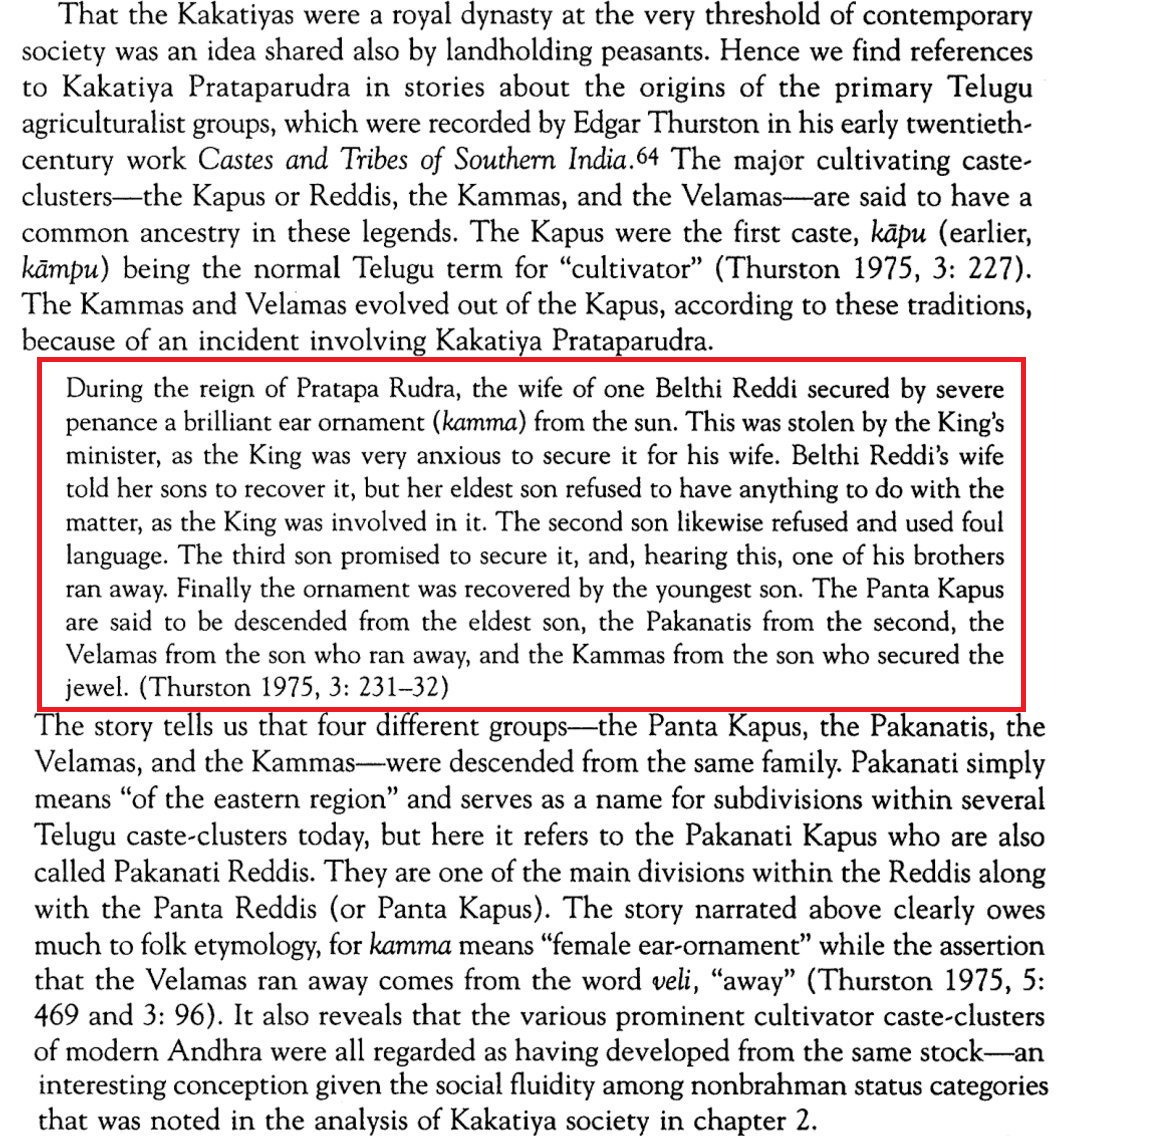 Anamika on Twitter: &quot;&quot;Velama&quot; was not a caste or clan during Kakatiya  period, excerpt from Cynthia Talbot&#39;s book &quot;Society and Identity in  Medieval Andhra&quot;:… https://t.co/nRx9jmrOqL&quot;